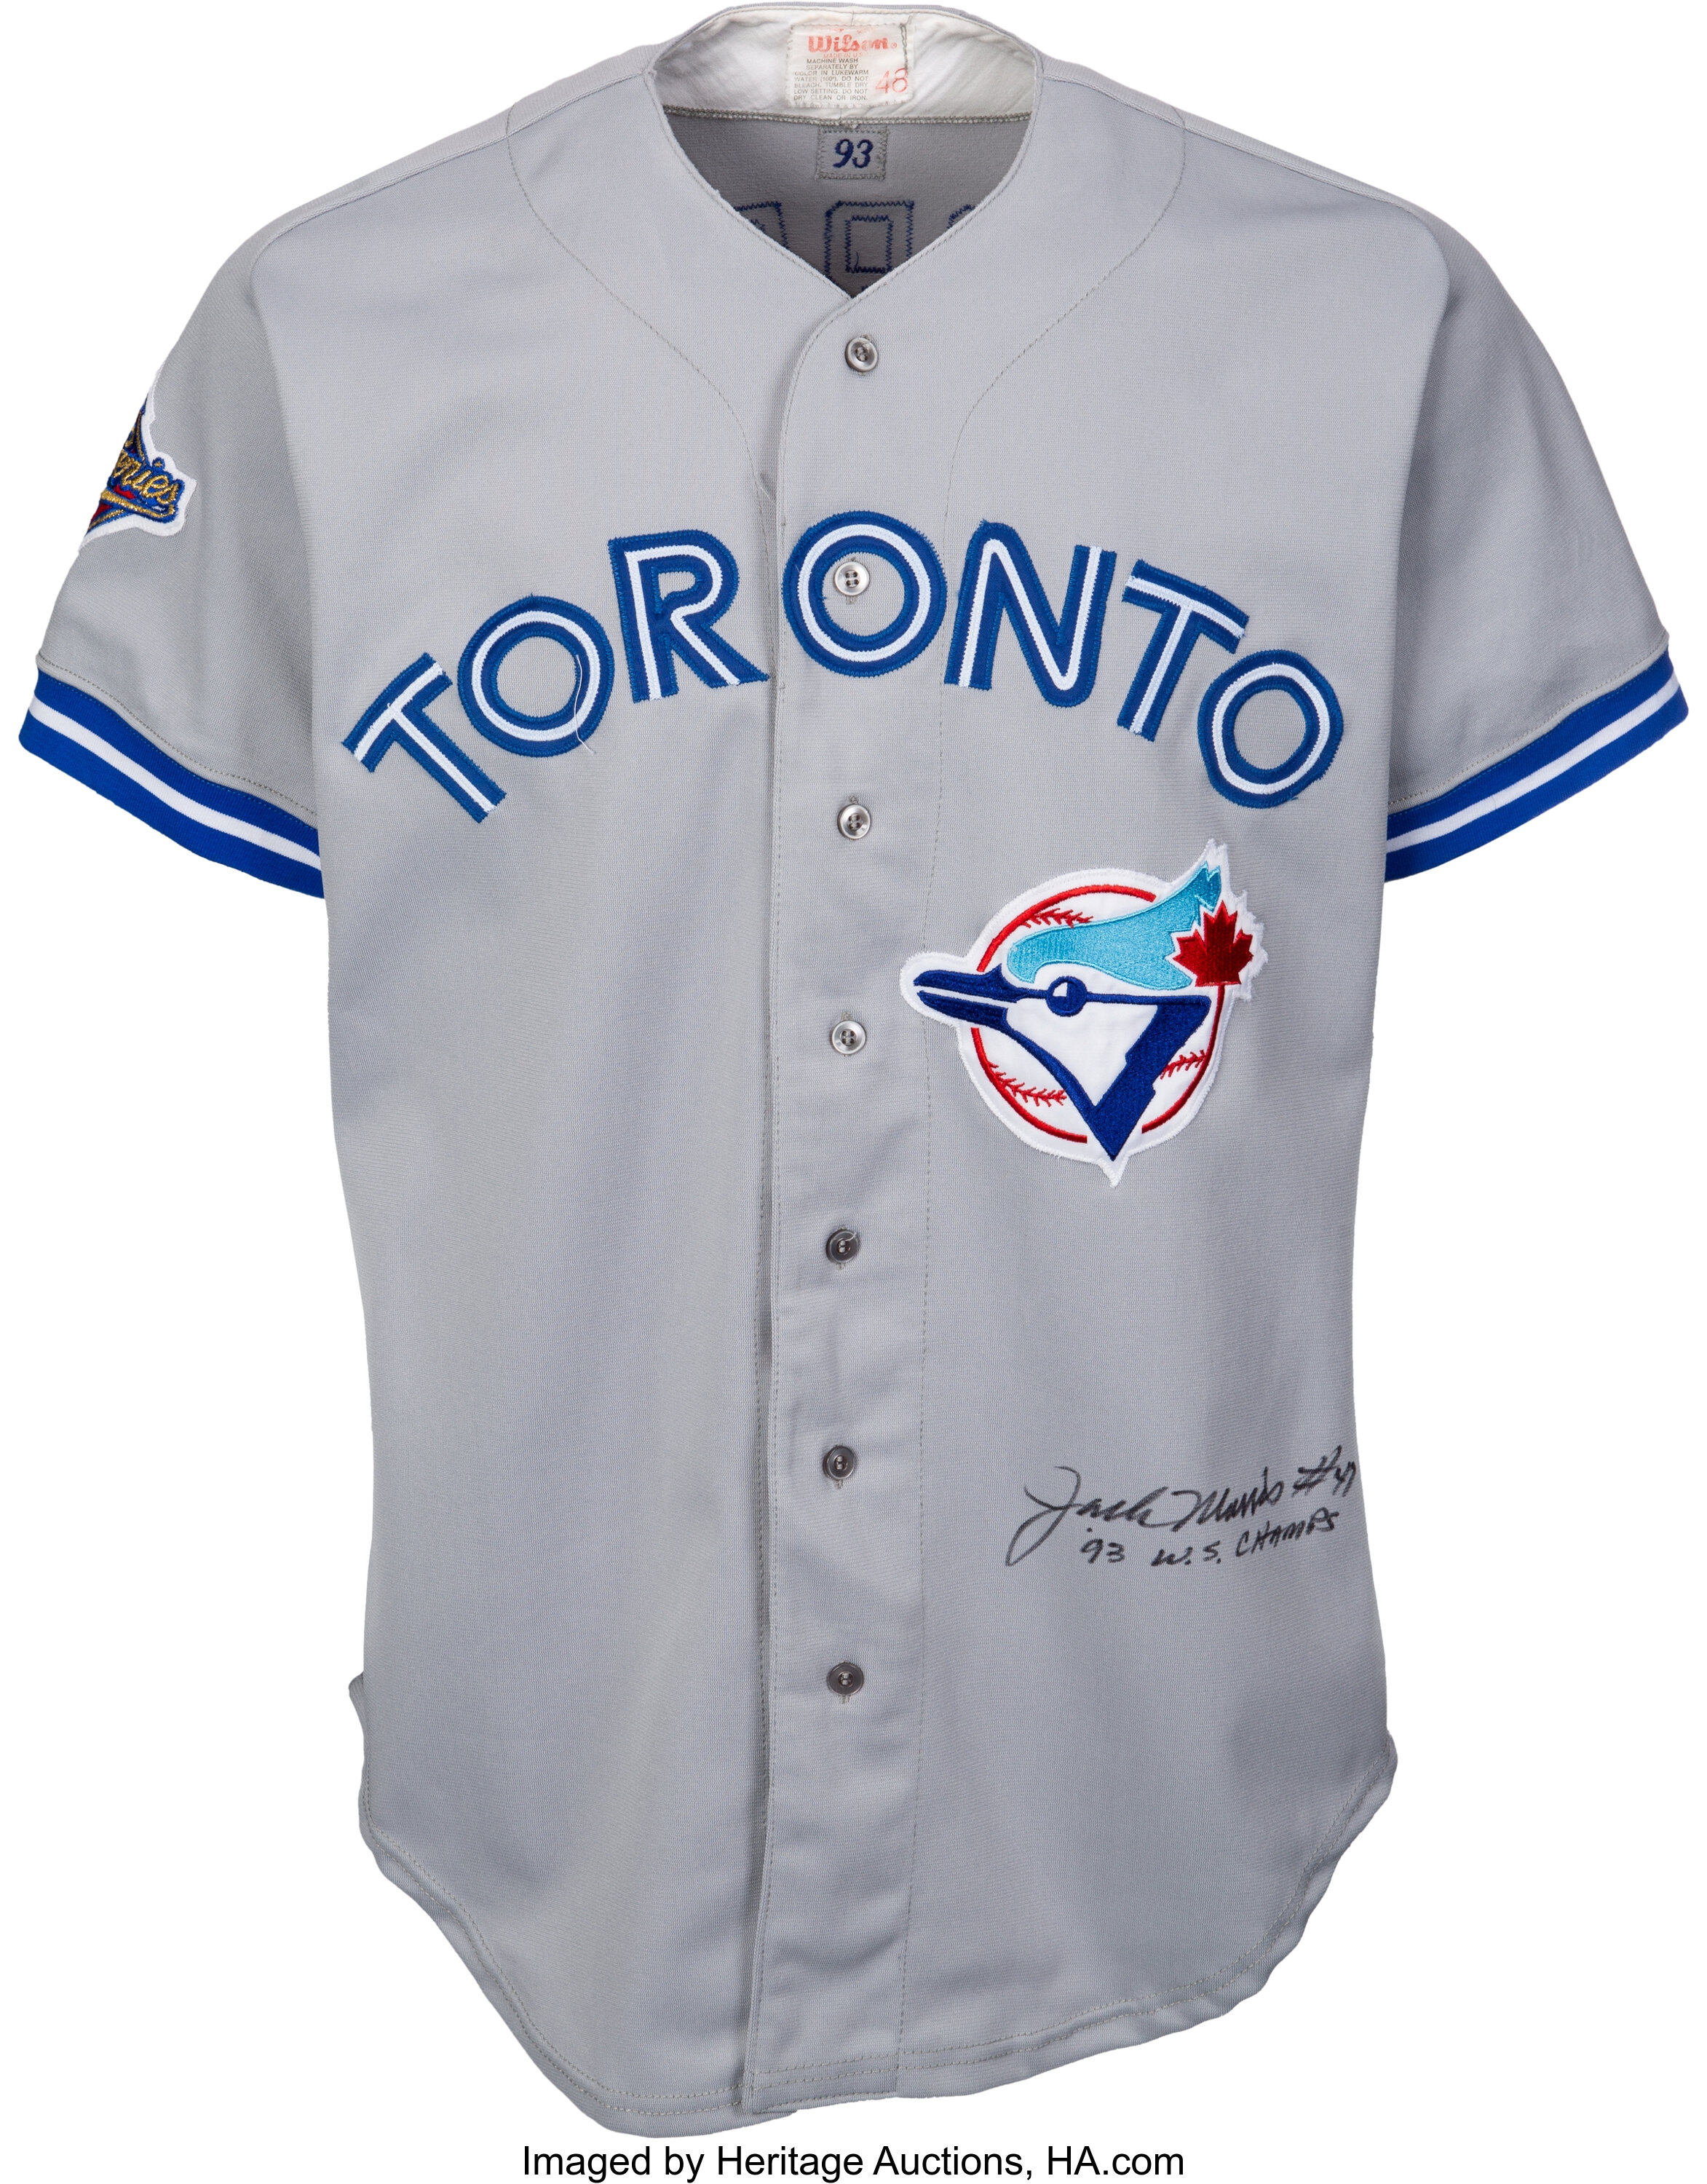 BLUE JAYS AUTHENTICS-2015 GAME-USED ALTERNATE BLUE JERSEY WORN BY